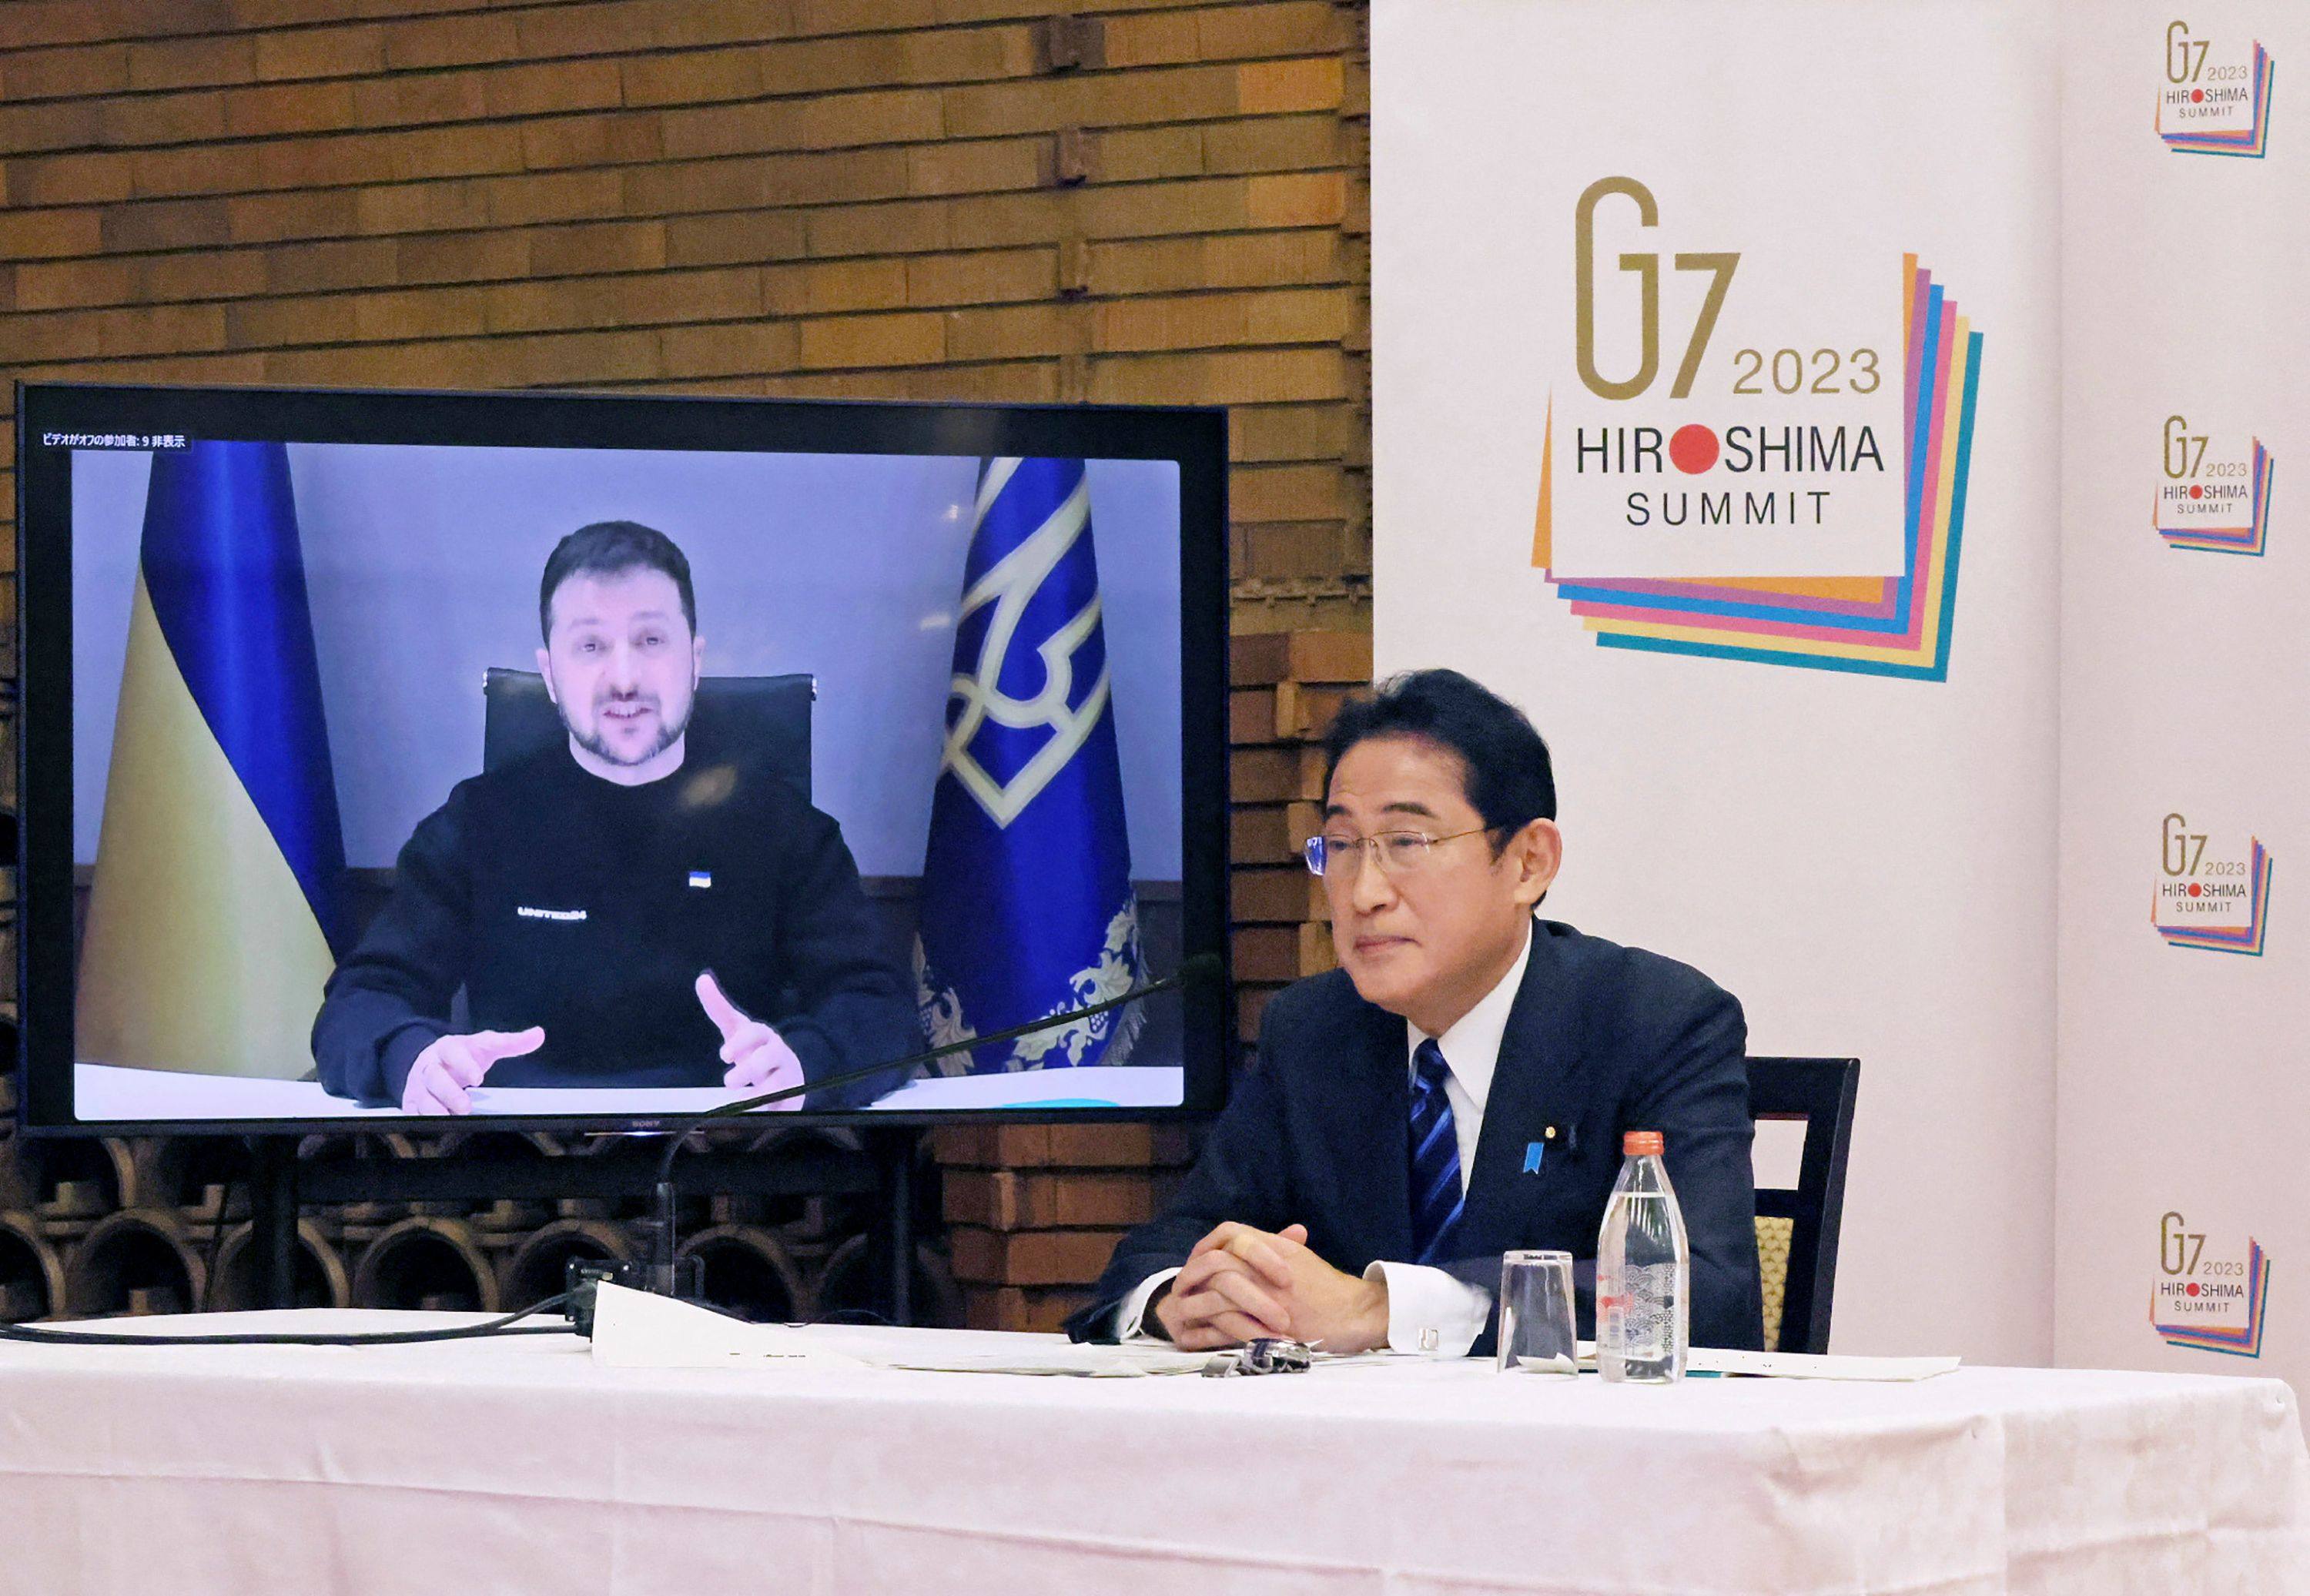 Japanese Prime Minister Fumio Kishida (right) listens as Ukrainian President Volodymyr Zelensky speaks during an online meeting with Group of 7 leaders at the prime minister’s official residence in Tokyo on February 24. Kishida faces a difficult task in pursuing his goal of increasing Japan’s diplomatic and military clout without damaging important relations with China and Russia. Photo: AFP